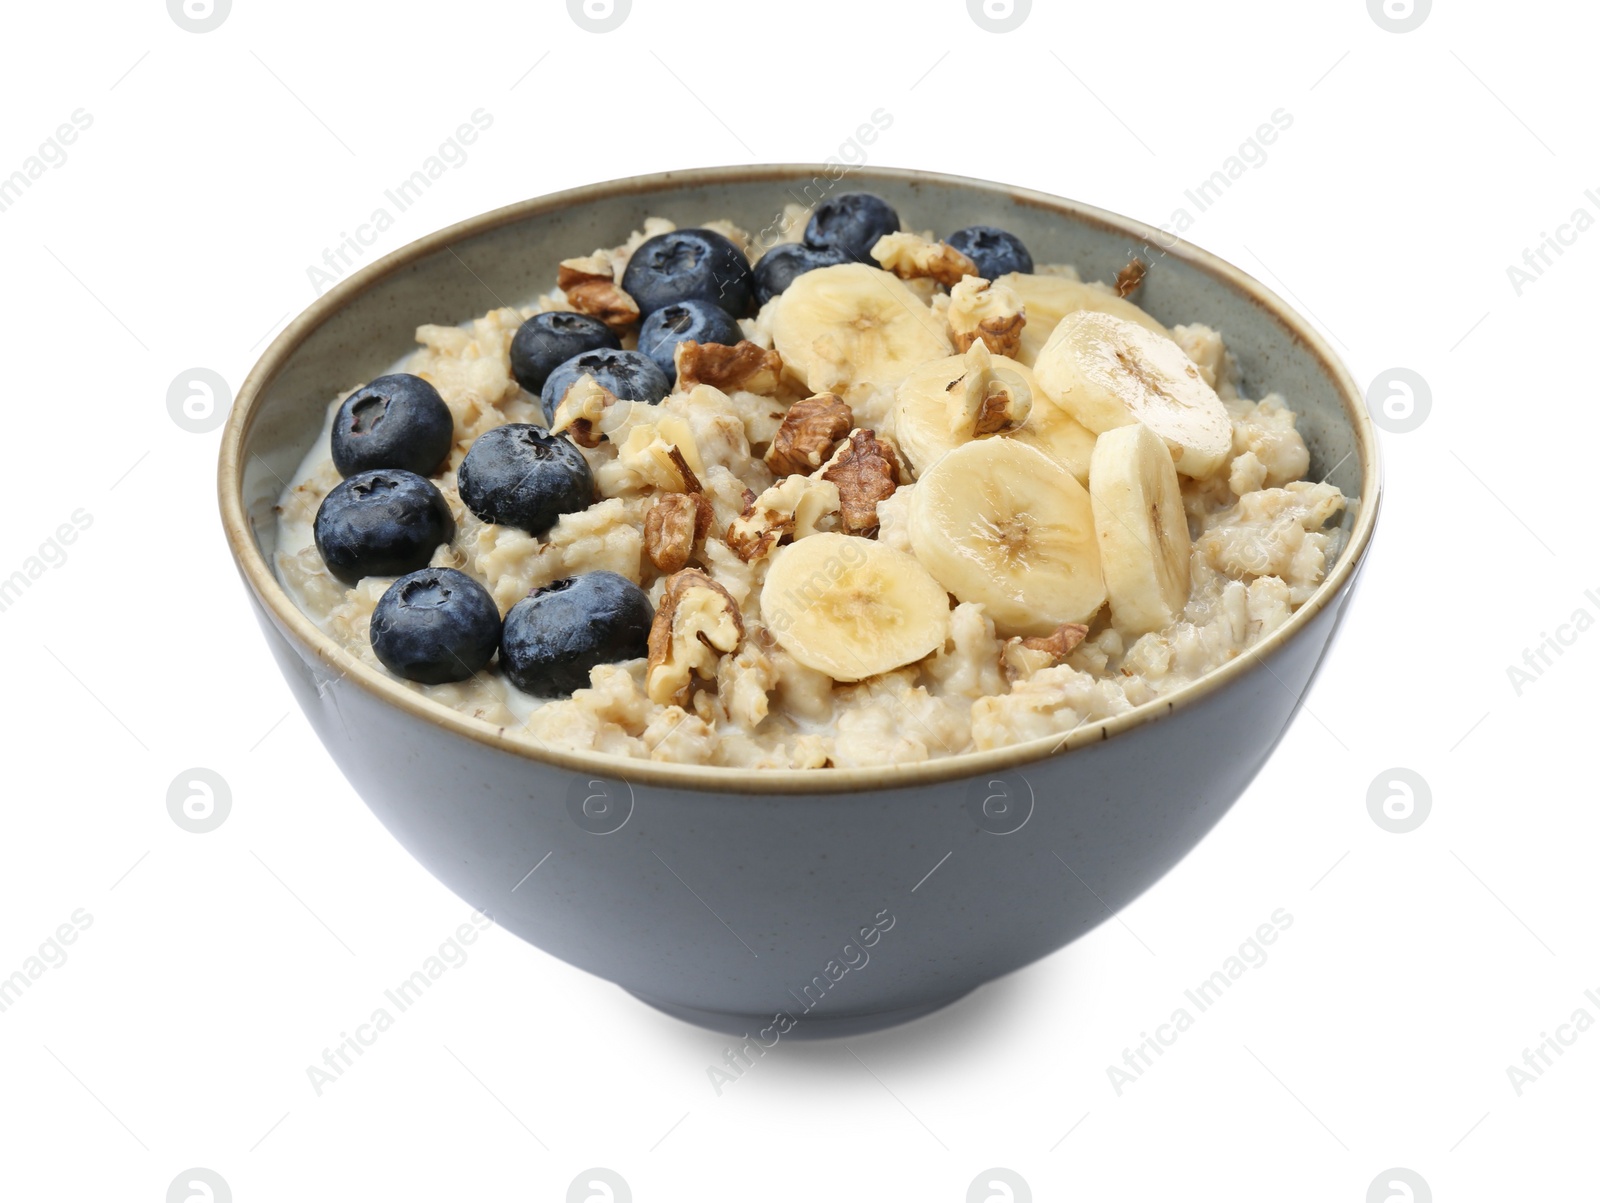 Photo of Tasty oatmeal with banana, blueberries, milk and walnuts in bowl isolated on white